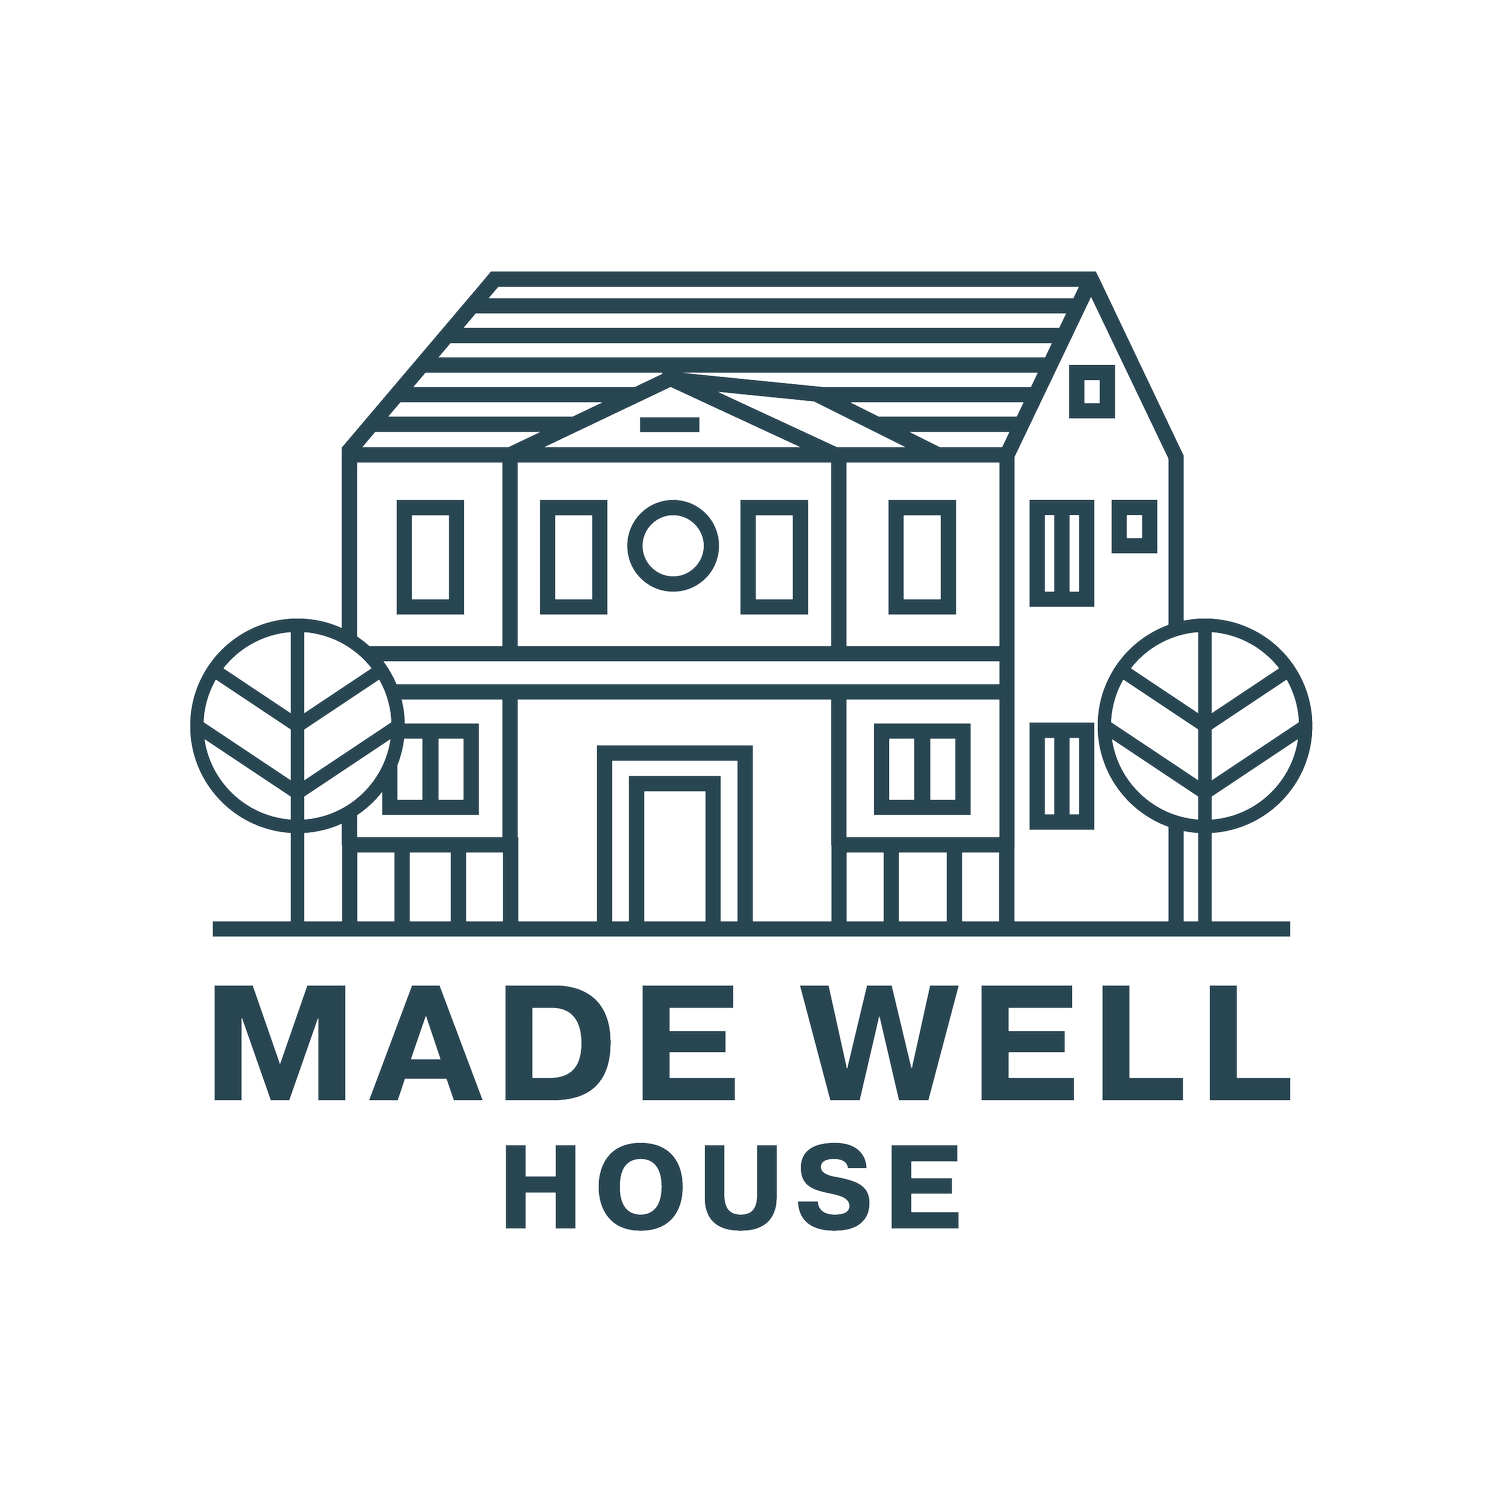 THE MADE WELL HOUSE FIT